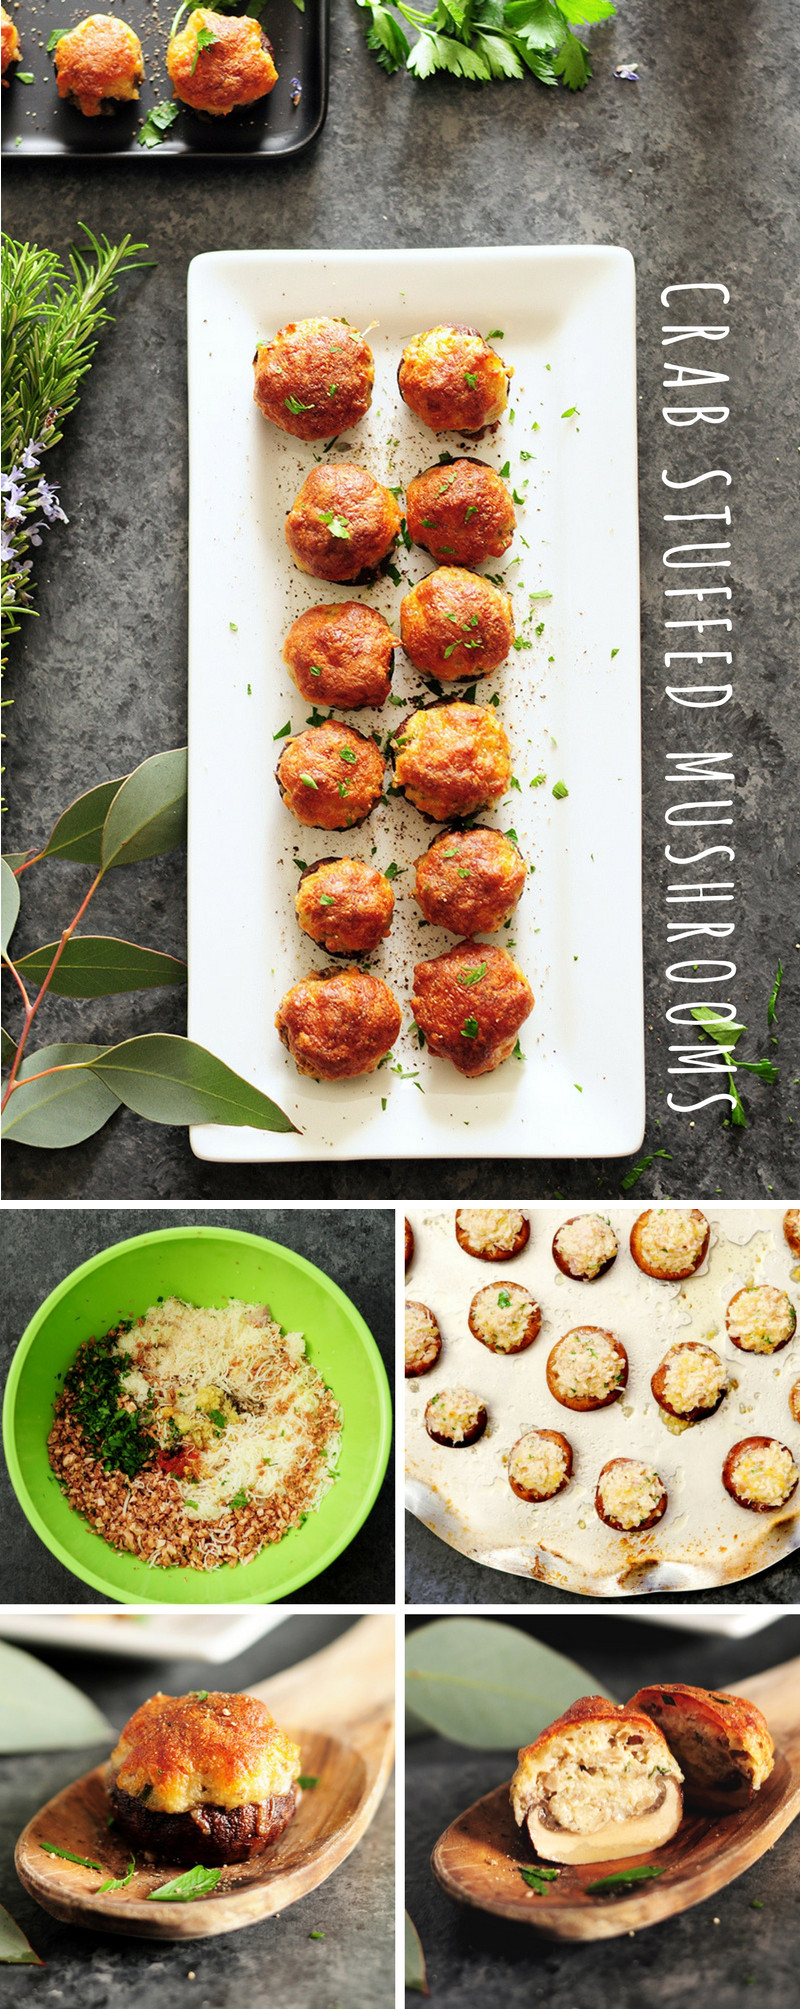 Gluten-free crab filling stuffed into mushrooms and covered with a blanket of cheese, these crab stuffed mushrooms are amazing for a crowd or just for you.